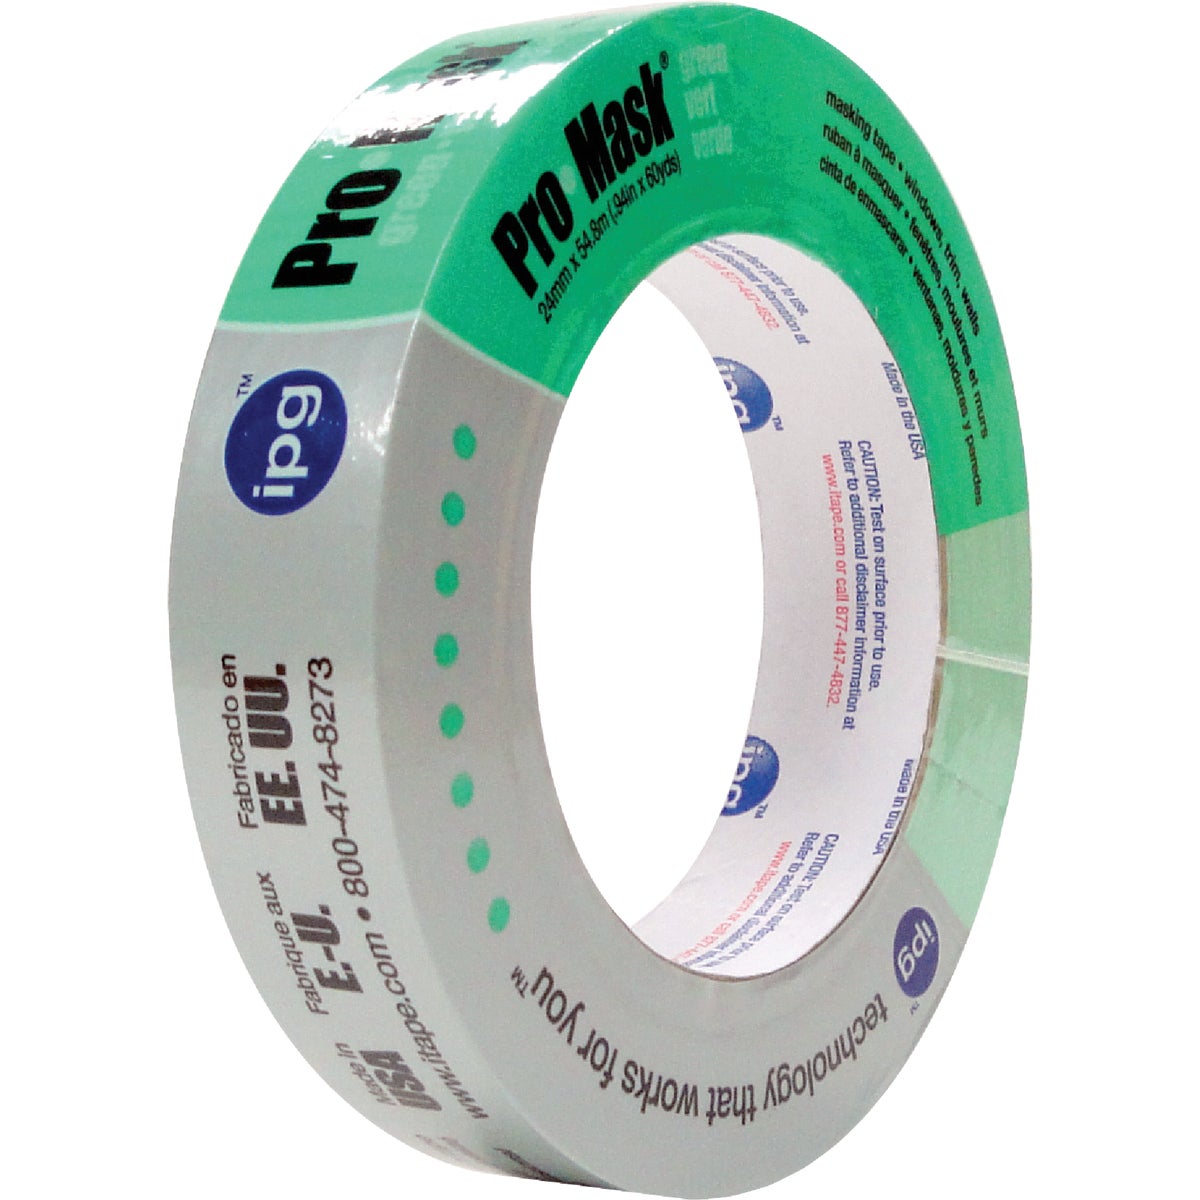 IPG ProMask Green 0.94 In. x 60 Yd. Professional Green Painter's Grade Masking Tape